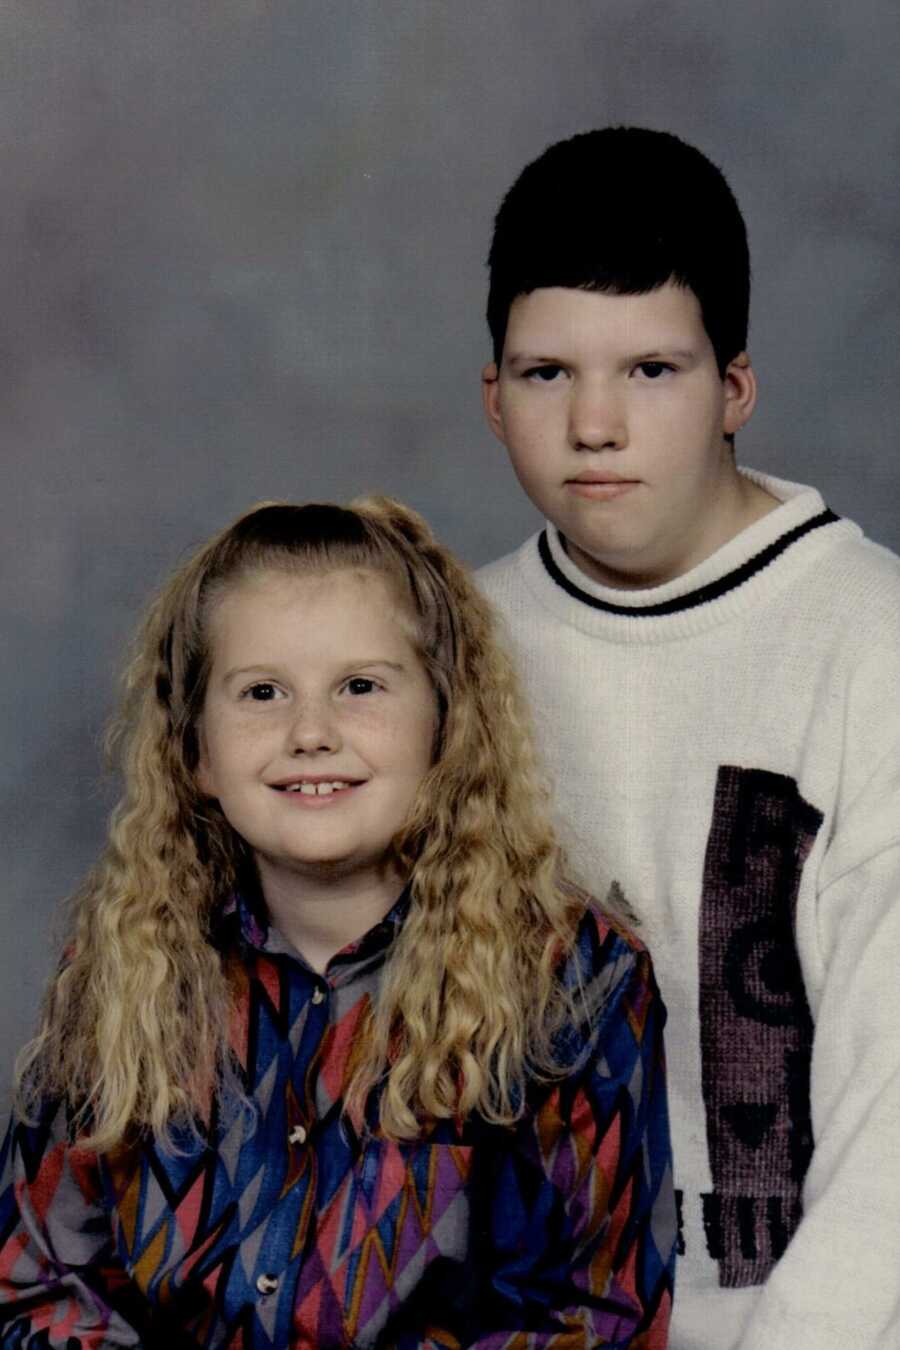 Sister and her older brother with chromasonal disability pose for photo